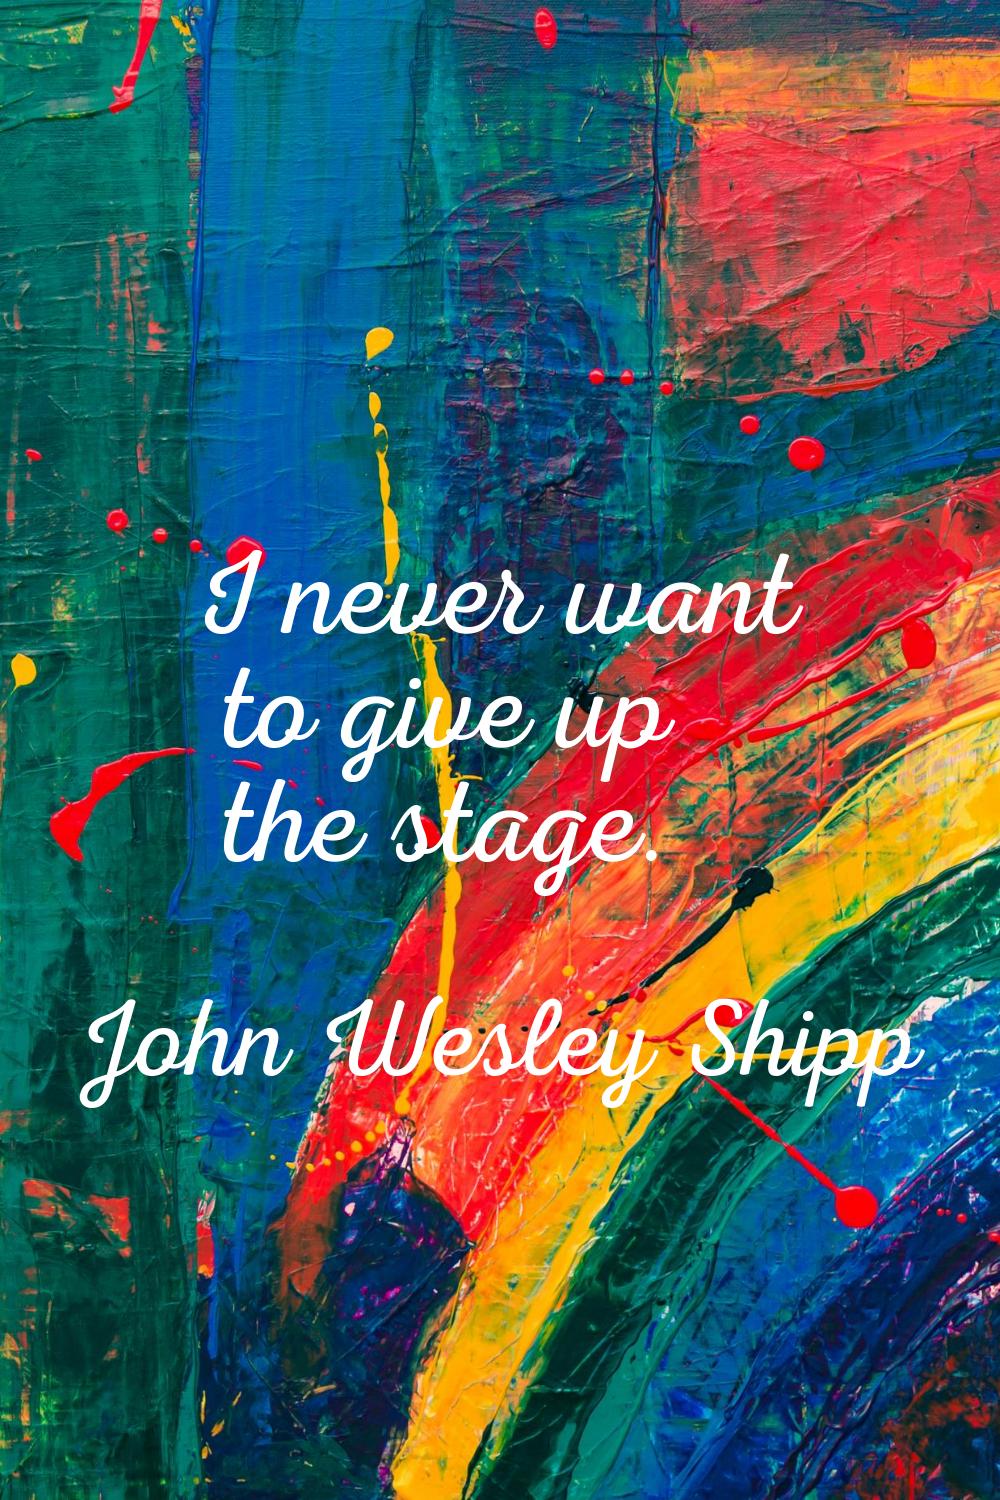 I never want to give up the stage.